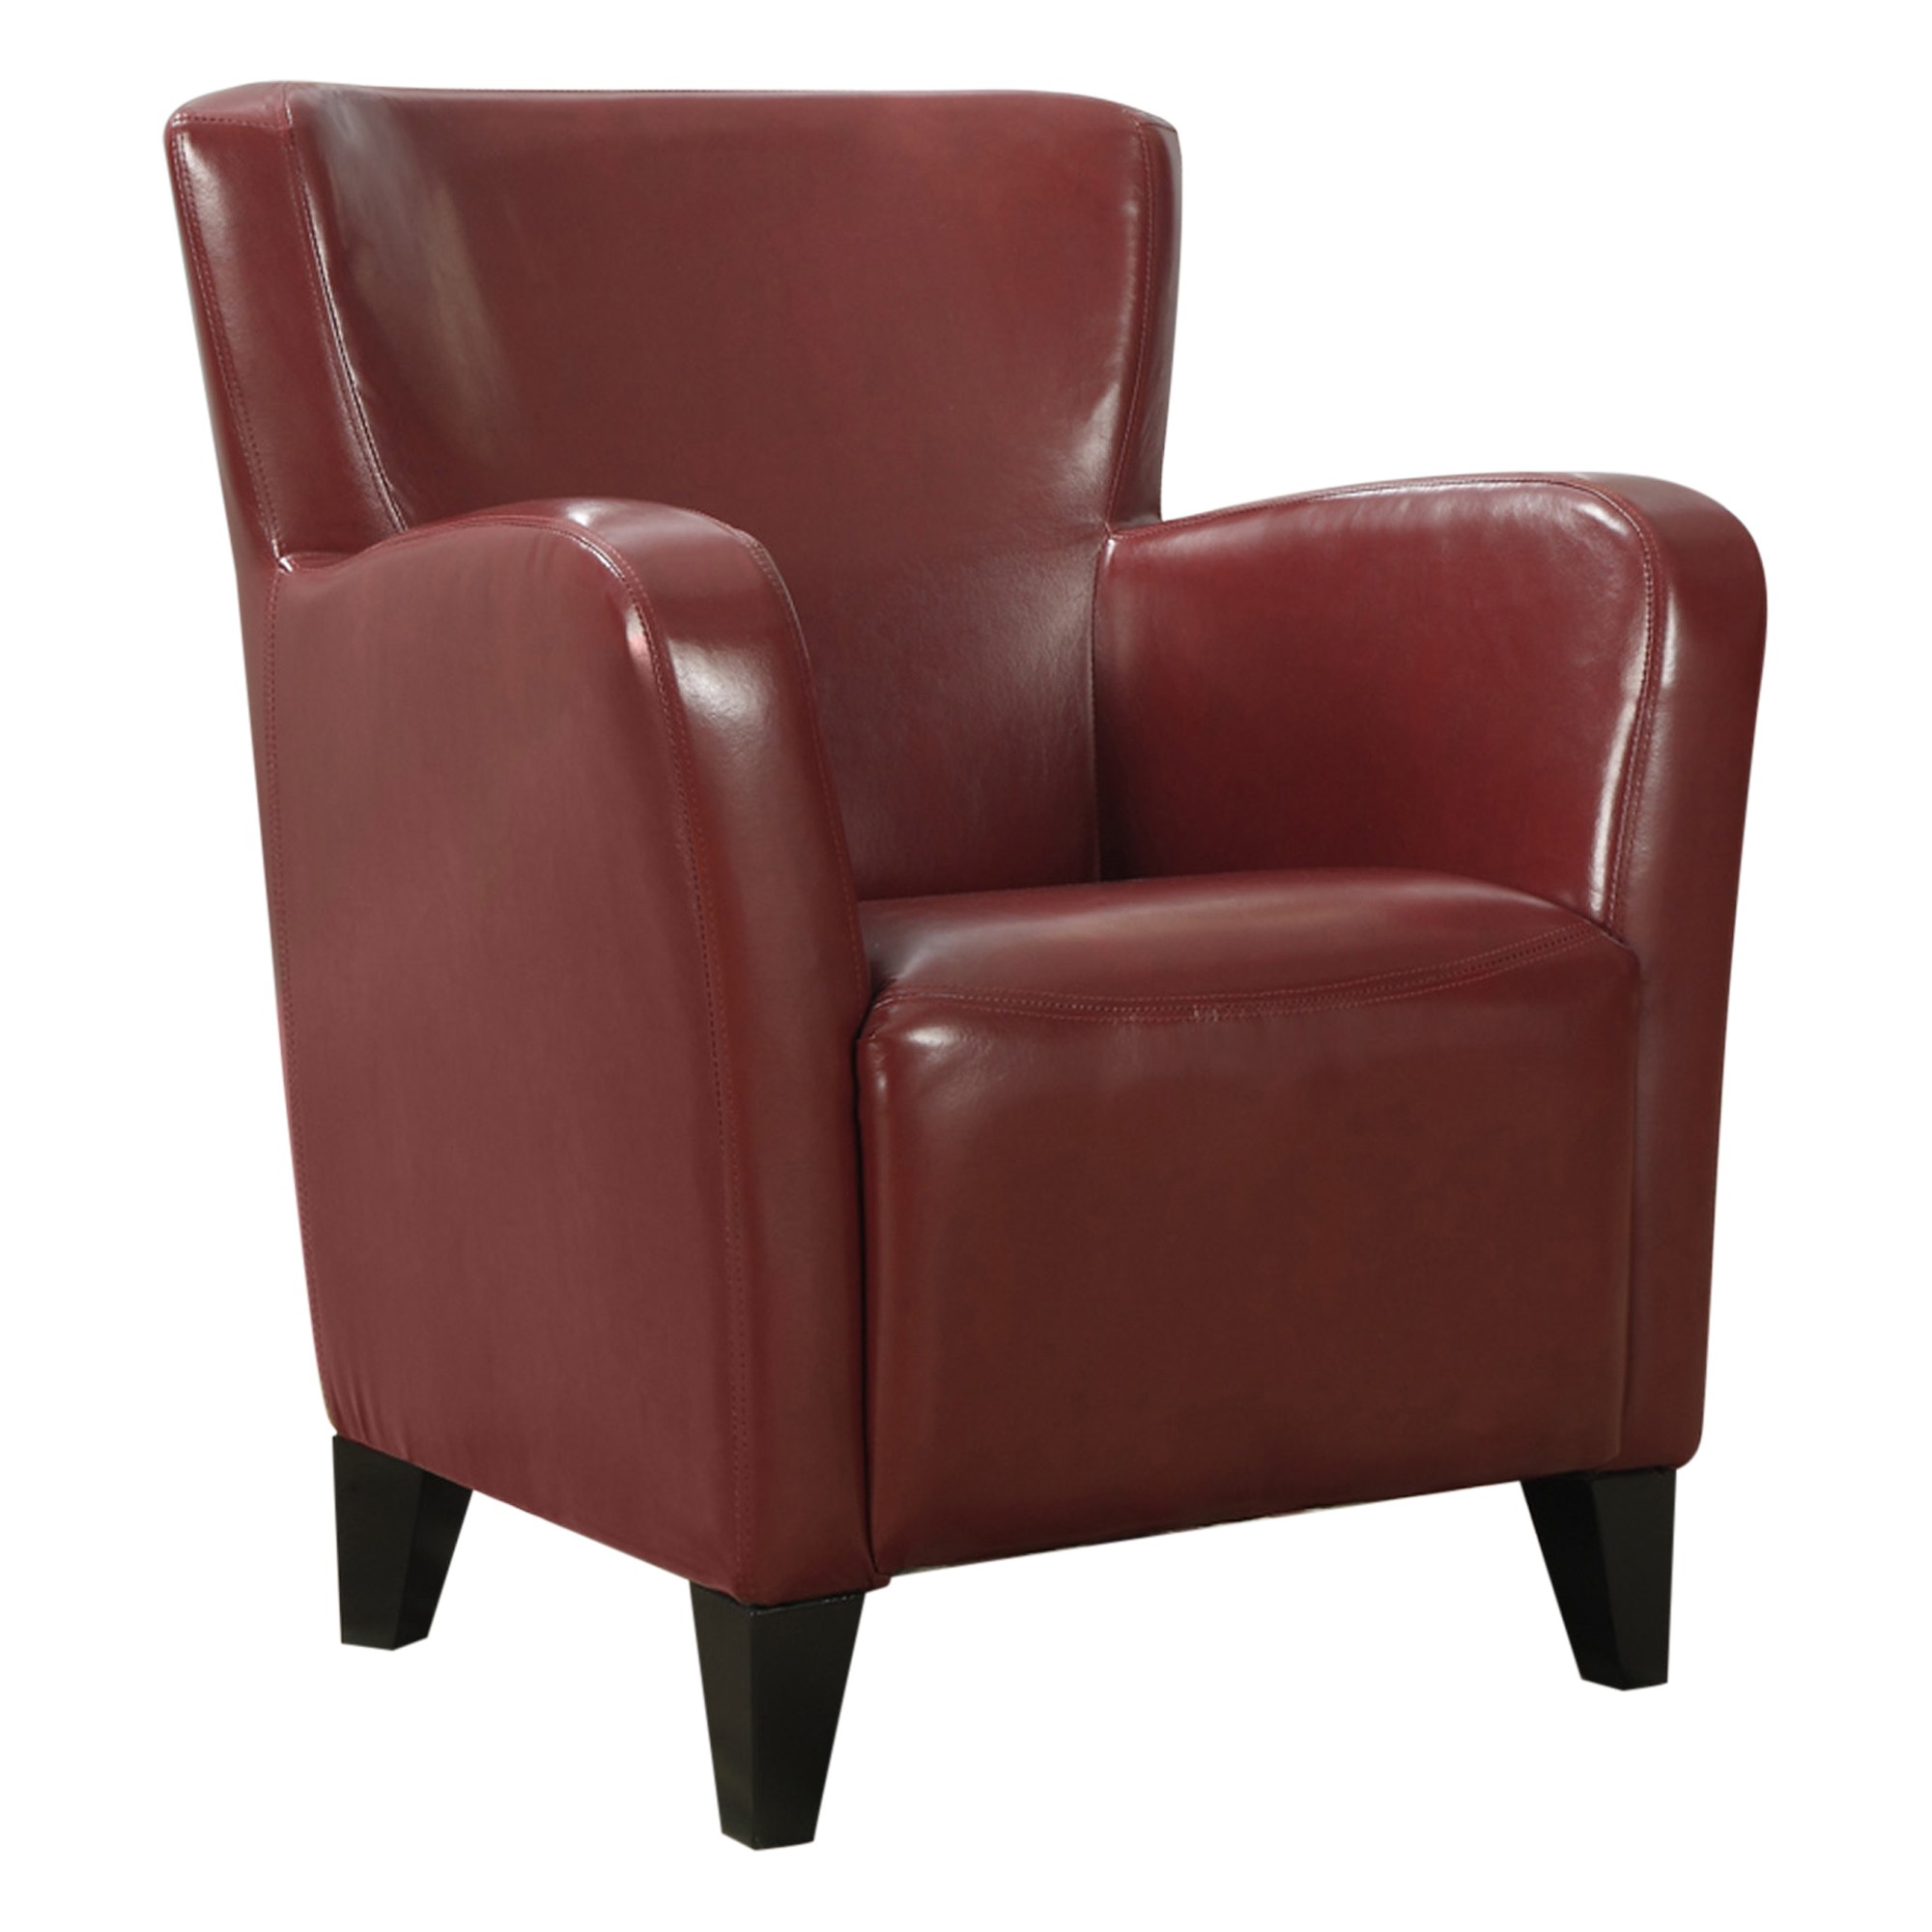 30" x 30" x 35" Red Leather-Look Foam and Black Solid Wood Accent Chair